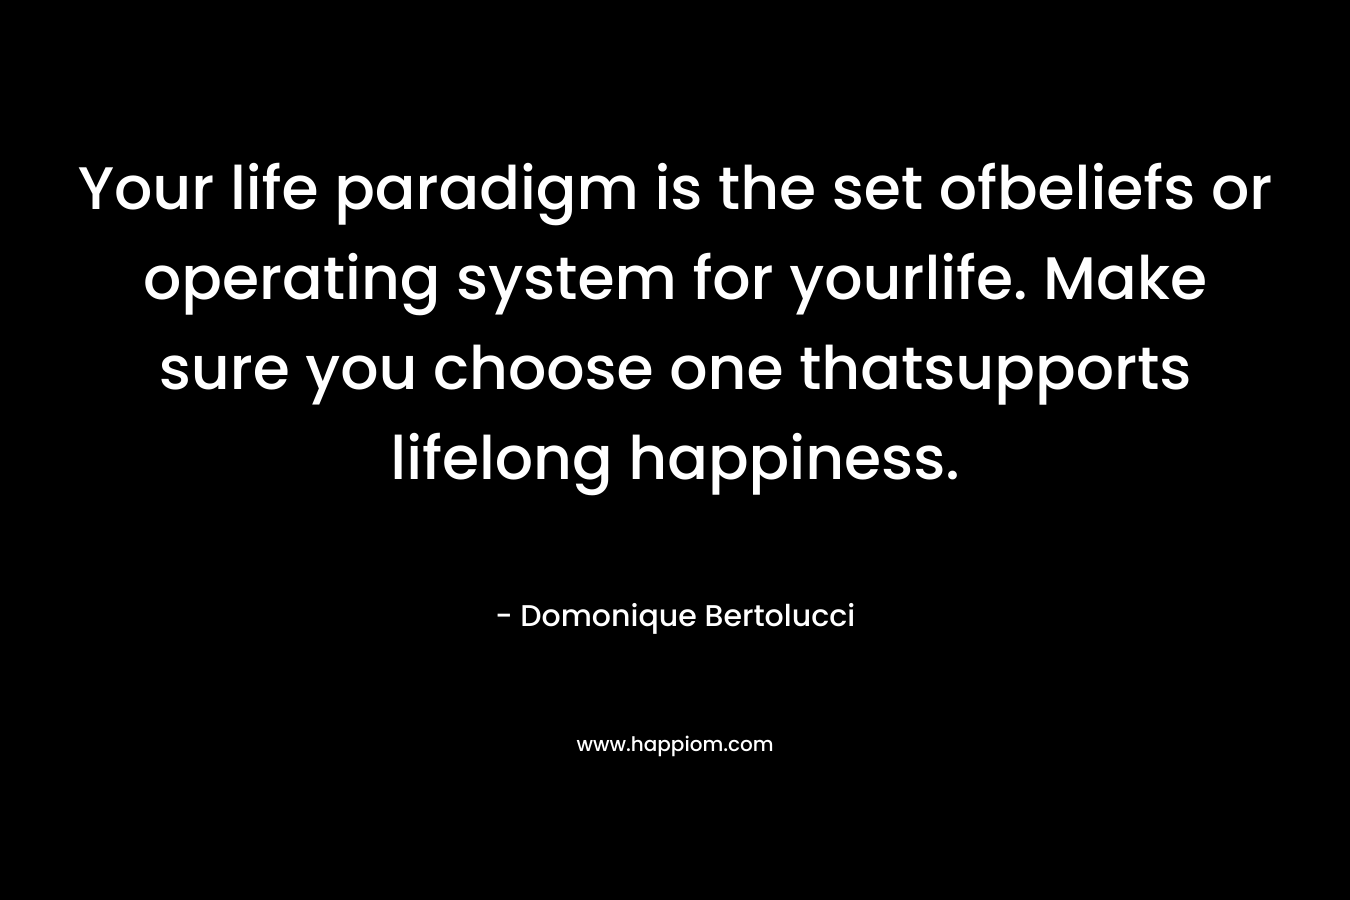 Your life paradigm is the set ofbeliefs or operating system for yourlife. Make sure you choose one thatsupports lifelong happiness. – Domonique Bertolucci